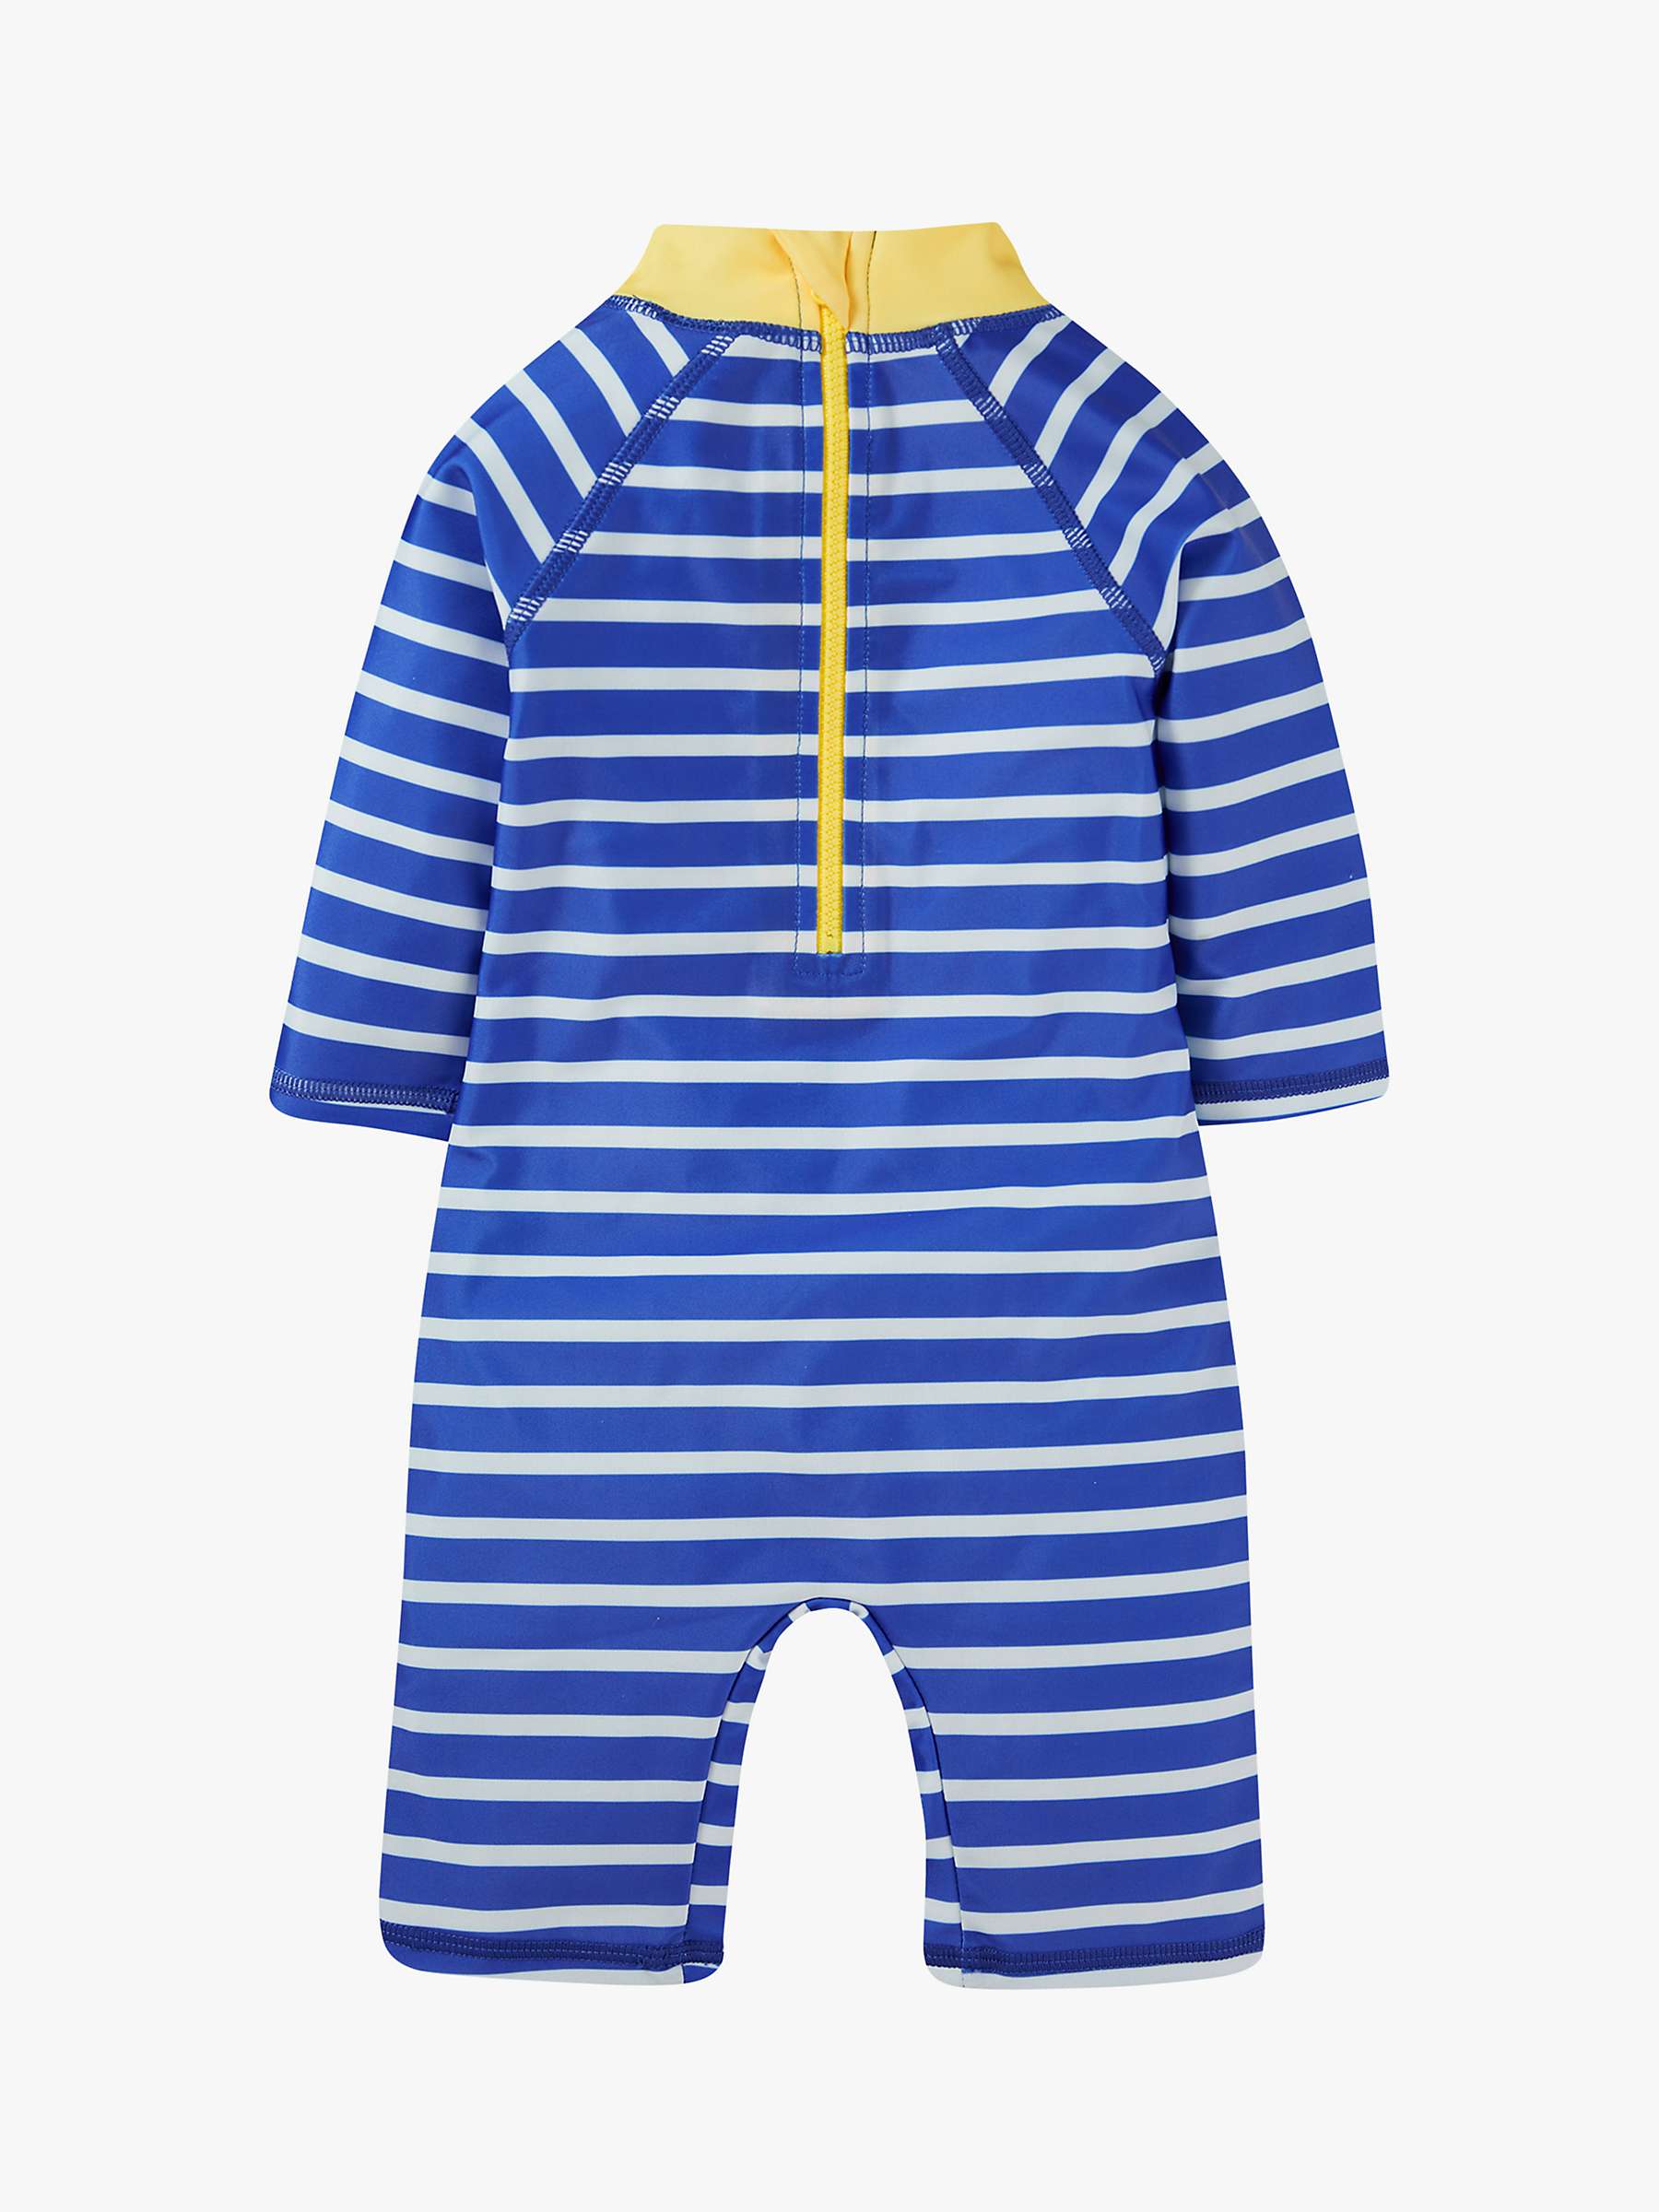 Buy Frugi Baby Shark Little Sun Safe Suit, Tropical Sea/Yellow Online at johnlewis.com